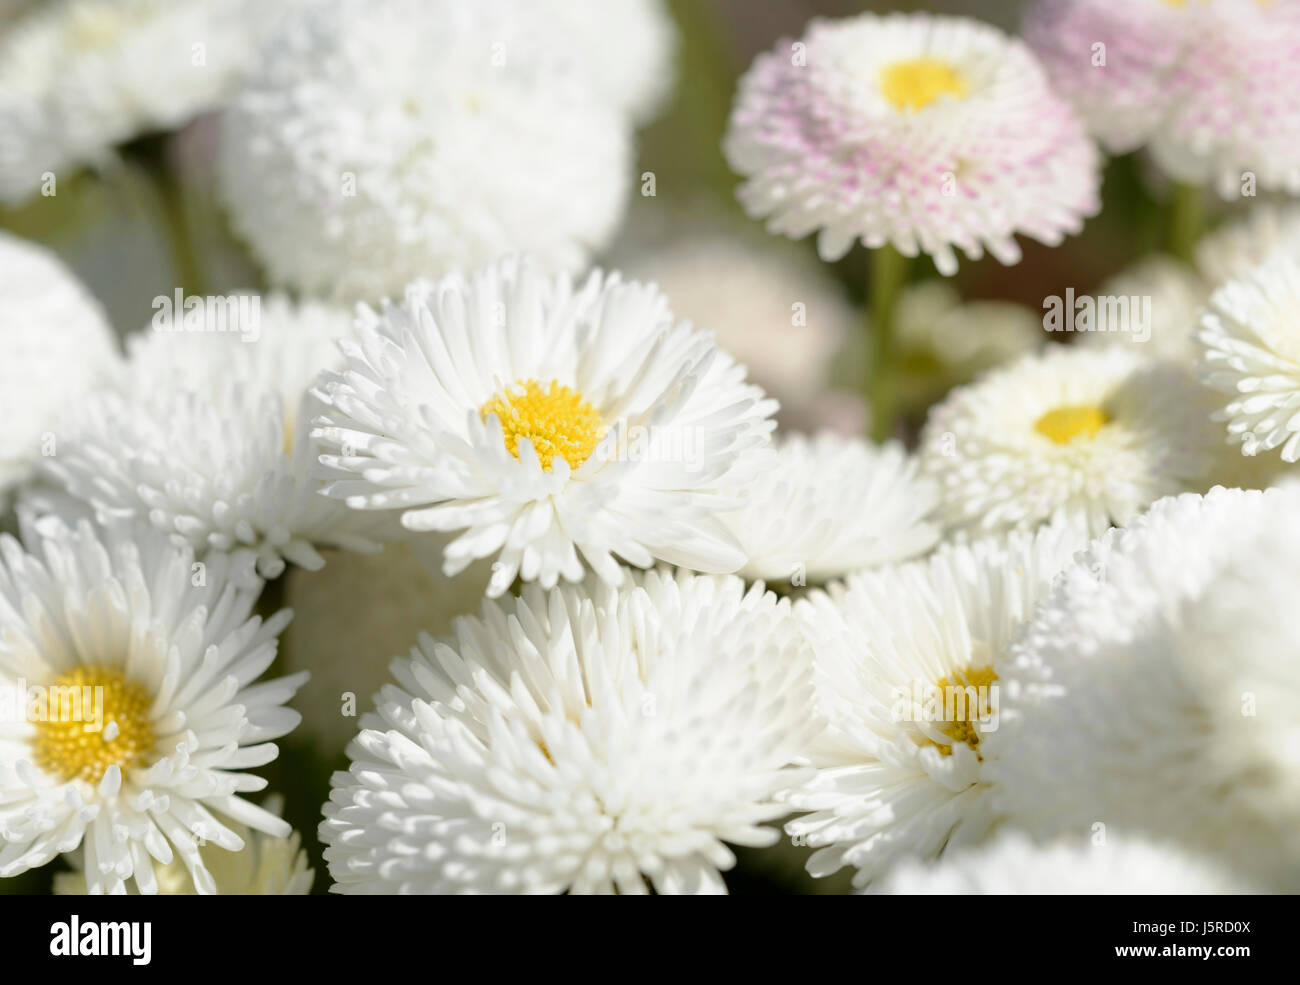 Daisy, Double daisy, Bellis perennis, White flowers growing outdoor in a garden. Stock Photo